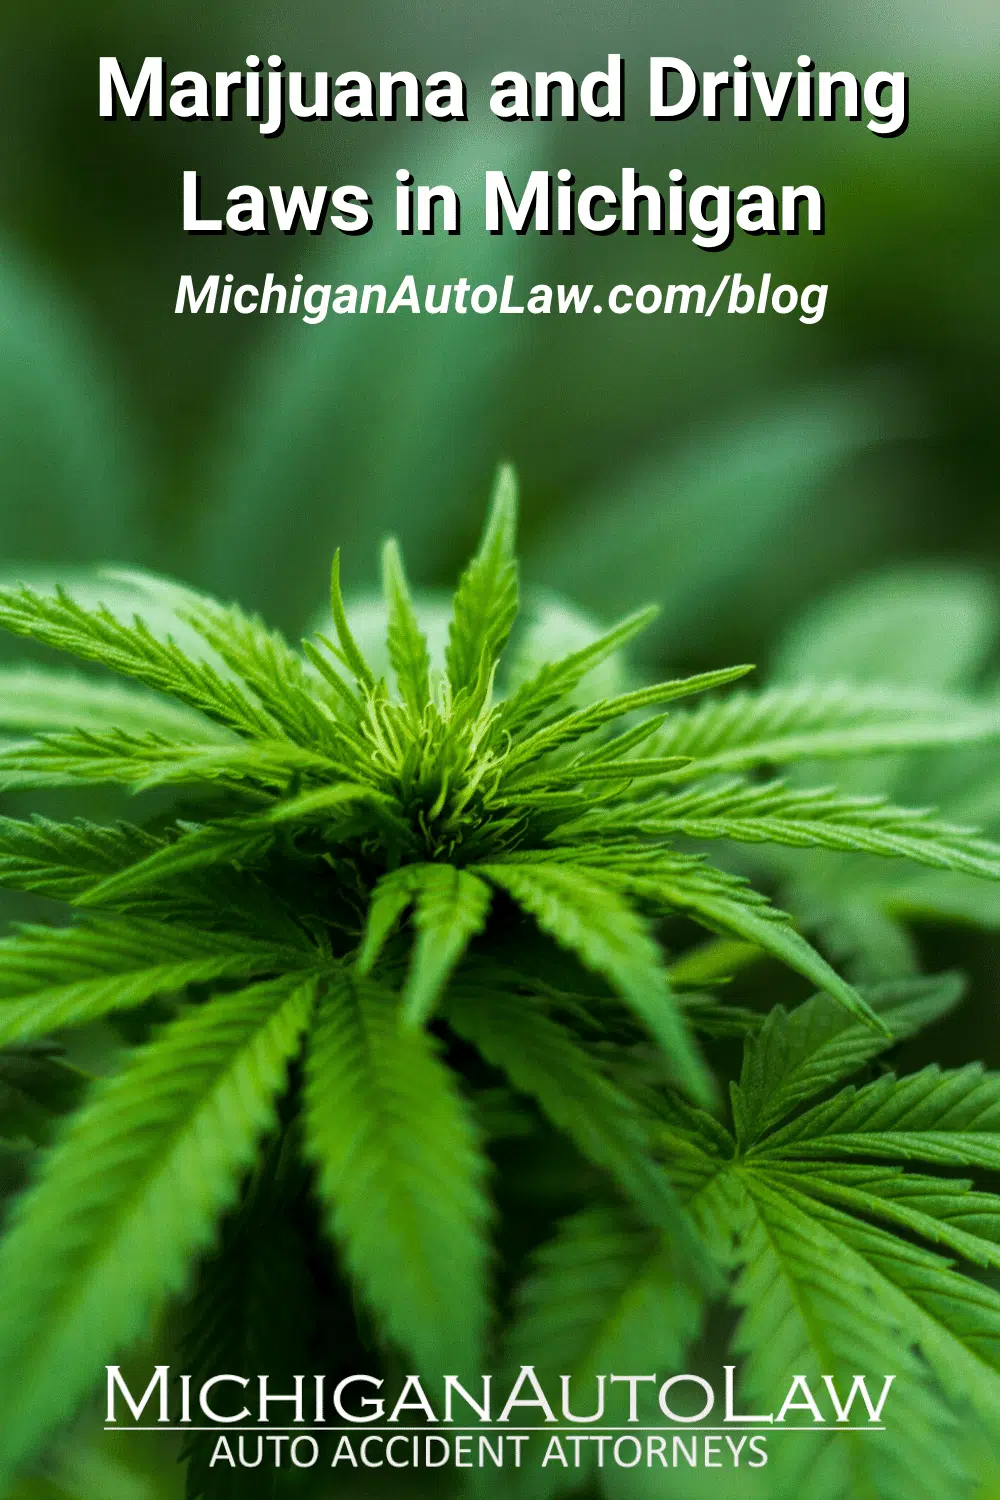 Michigan Marijuana and Driving Laws: What You Need To Know